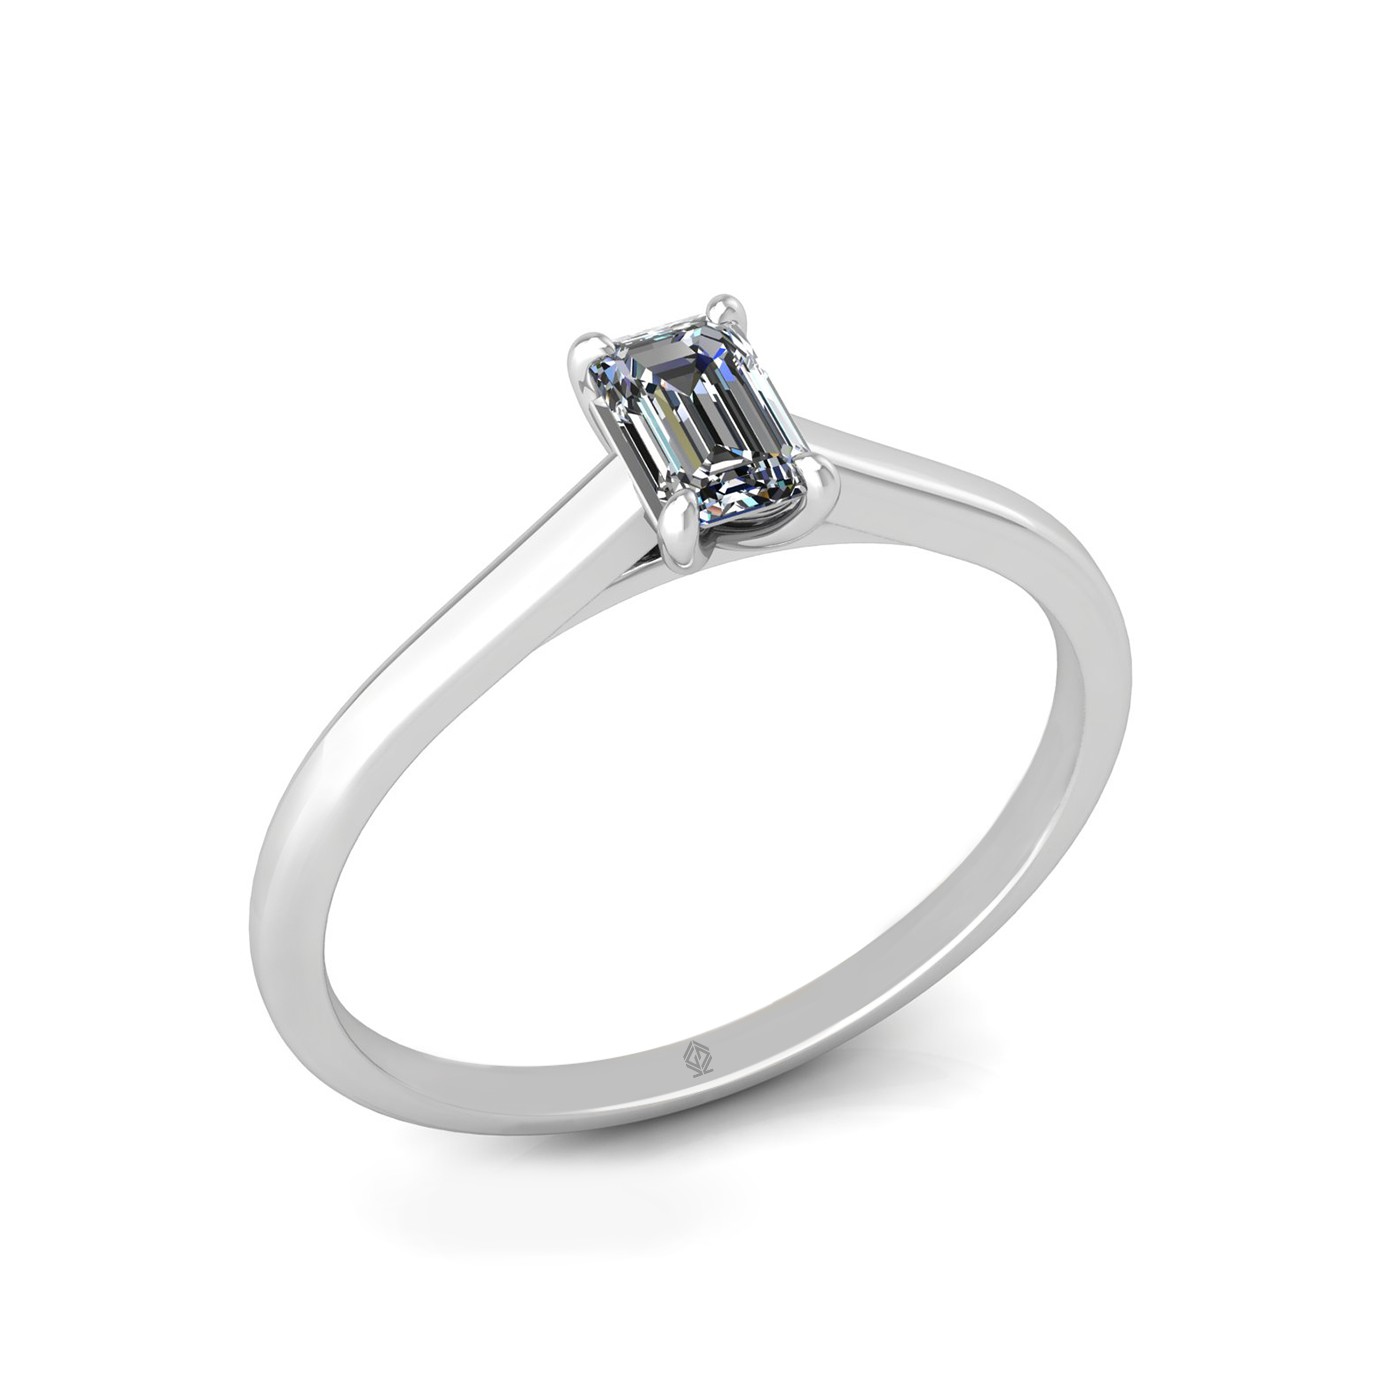 18k white gold  0,30 ct 4 prongs solitaire emerald cut diamond engagement ring with whisper thin band